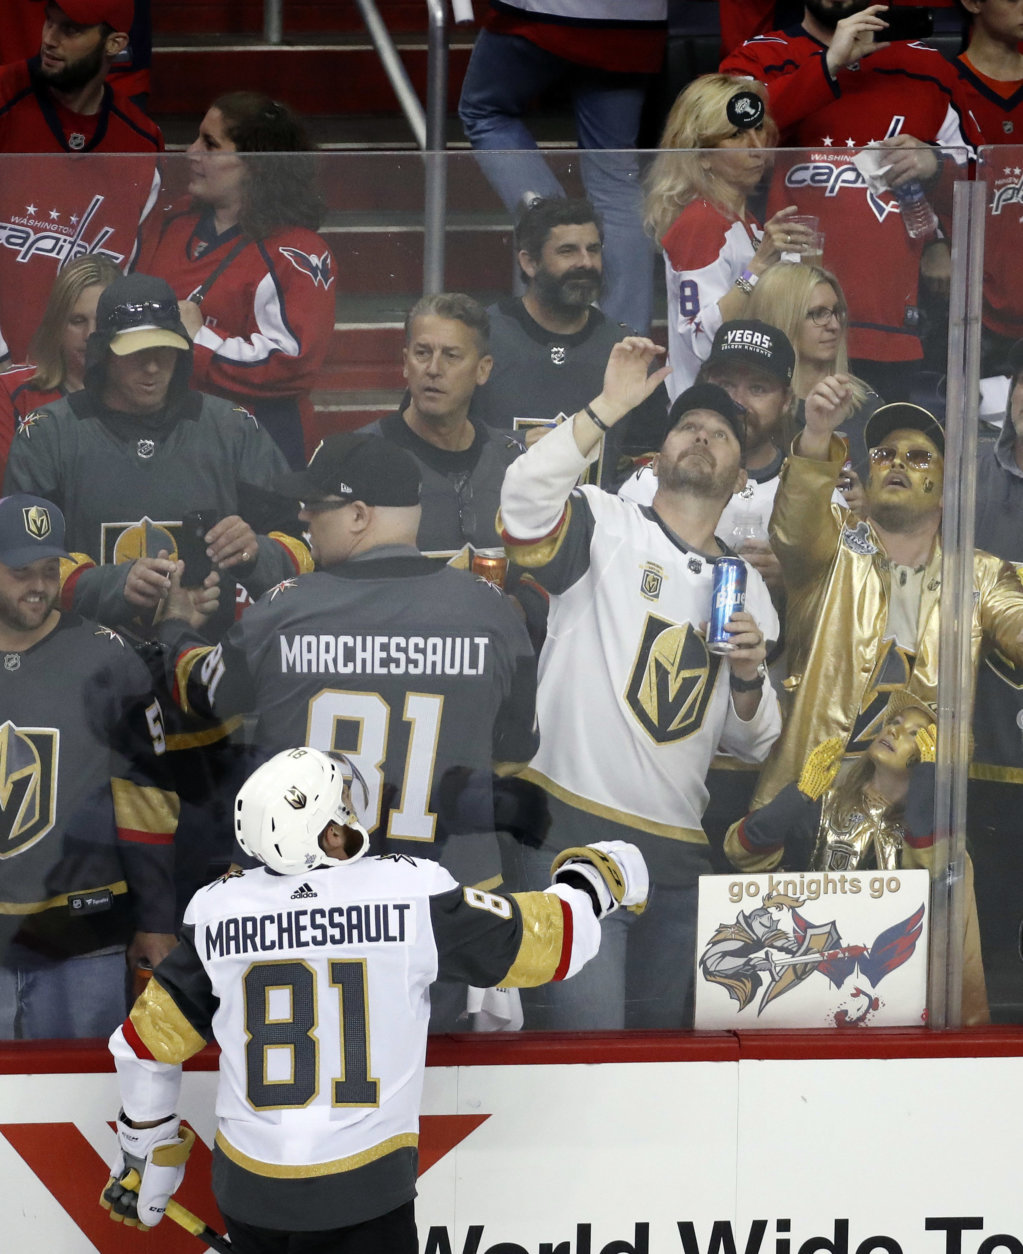 Vegas Golden Knights forward Jonathan Marchessault tosses a puck over the glass to fans as the team warms up before Game 4 of the NHL hockey Stanley Cup Final against the Washington Capitals, Monday, June 4, 2018, in Washington. (AP Photo/Pablo Martinez Monsivais)